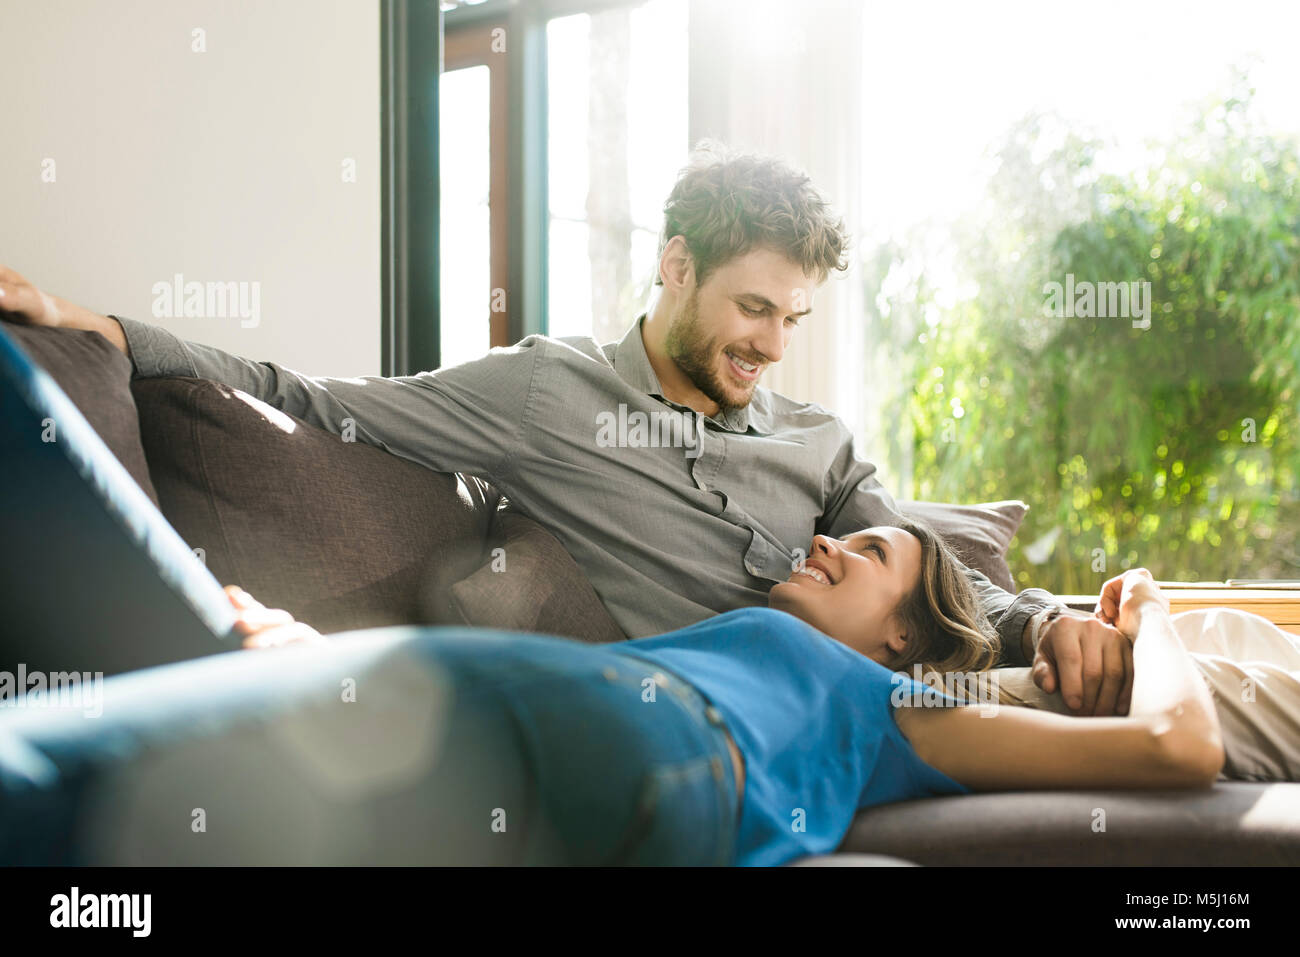 Affectionate couple smiling on sofa at home Banque D'Images